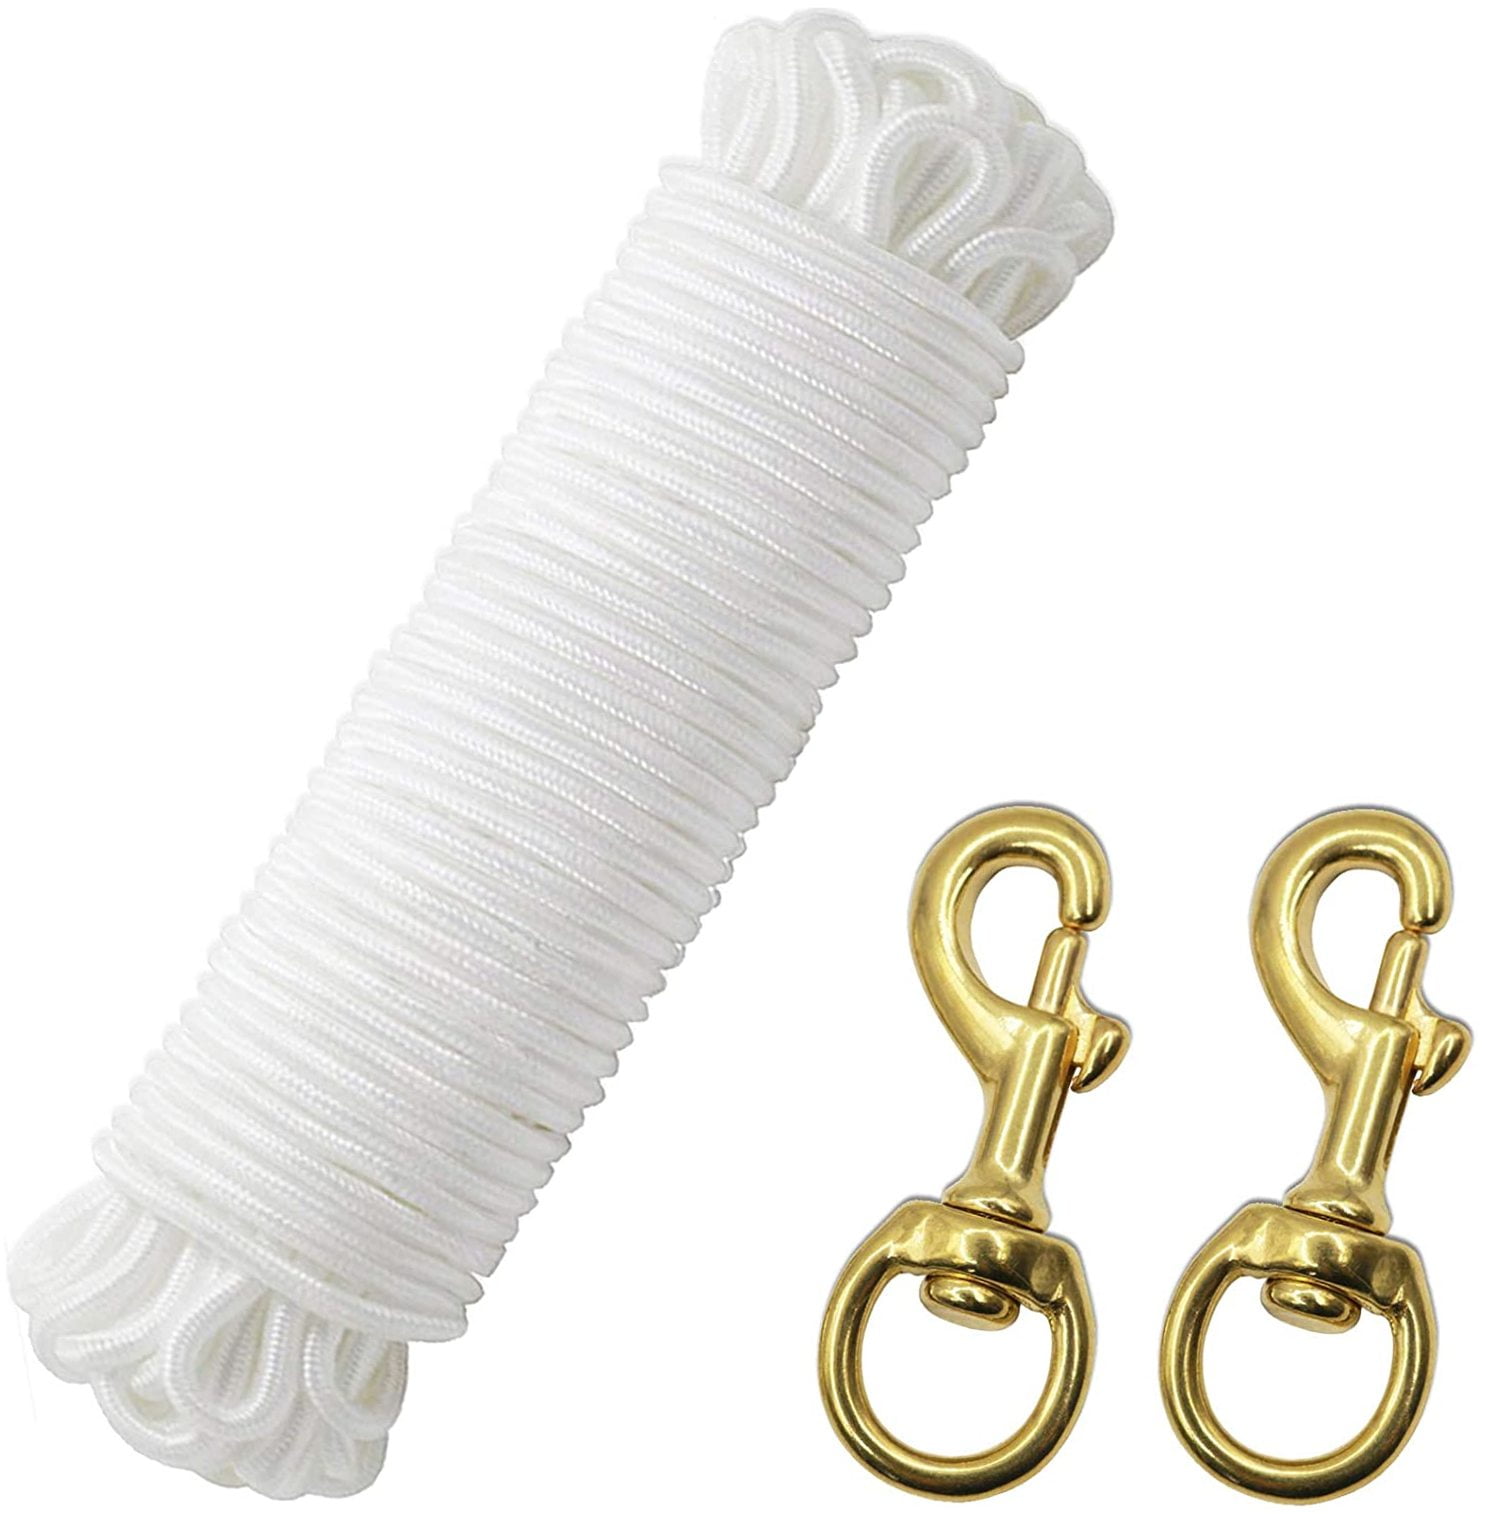 4 free clips 11.5m X 5mm LOW STRETCH POLYESTER BRAIDED FLAGROPE WHITE ONLY inc 